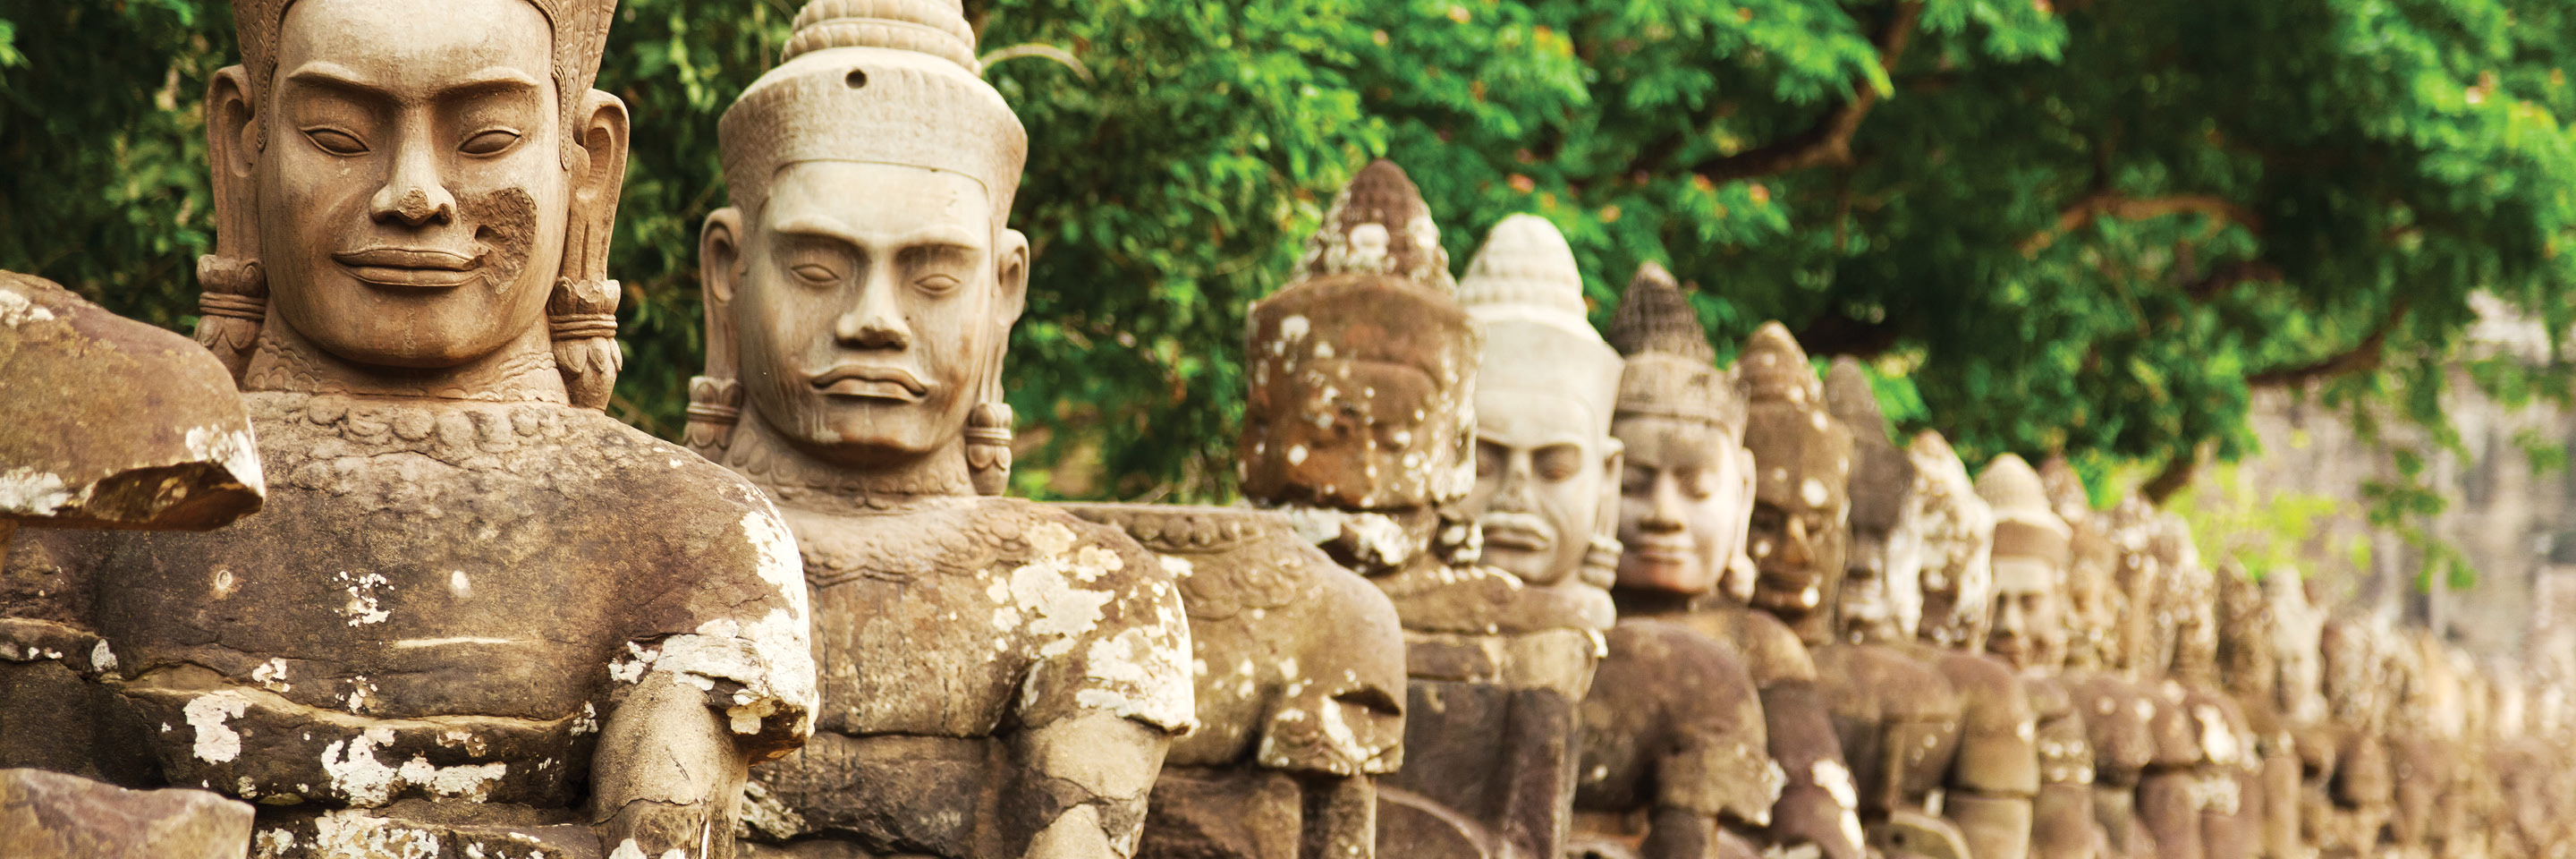 Independent Cambodia & Thailand: From Angkor Wat to the Beaches of Phuket